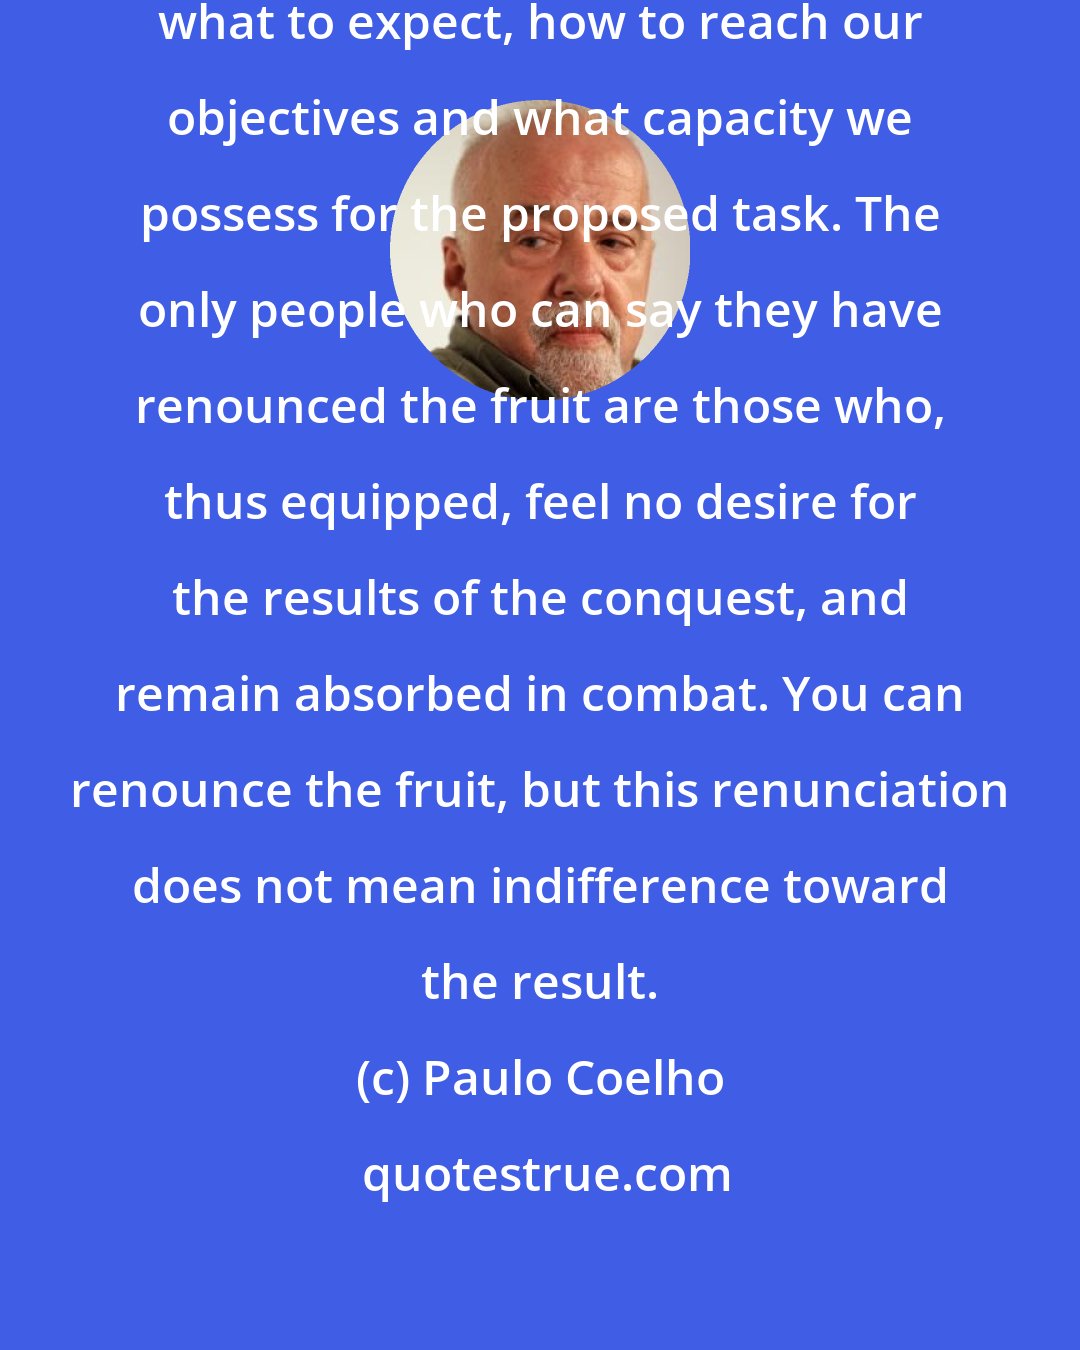 Paulo Coelho: In any activity, we have to know what to expect, how to reach our objectives and what capacity we possess for the proposed task. The only people who can say they have renounced the fruit are those who, thus equipped, feel no desire for the results of the conquest, and remain absorbed in combat. You can renounce the fruit, but this renunciation does not mean indifference toward the result.